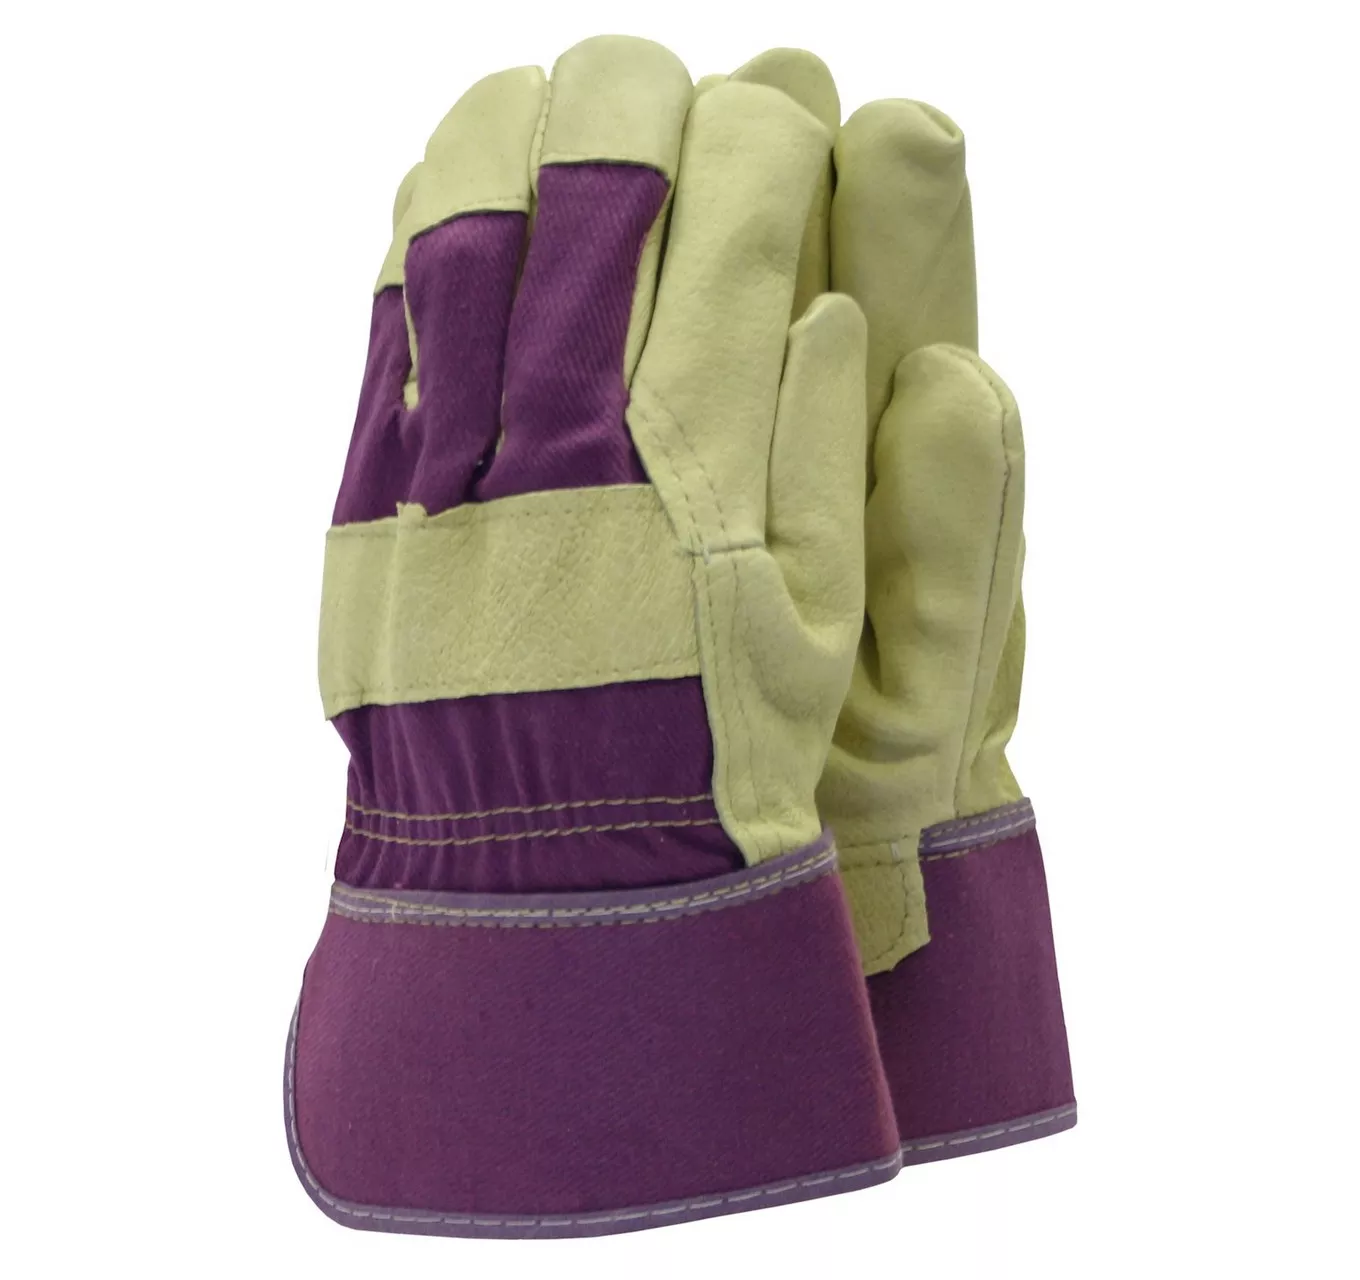 Washable Leather Rigger Glove